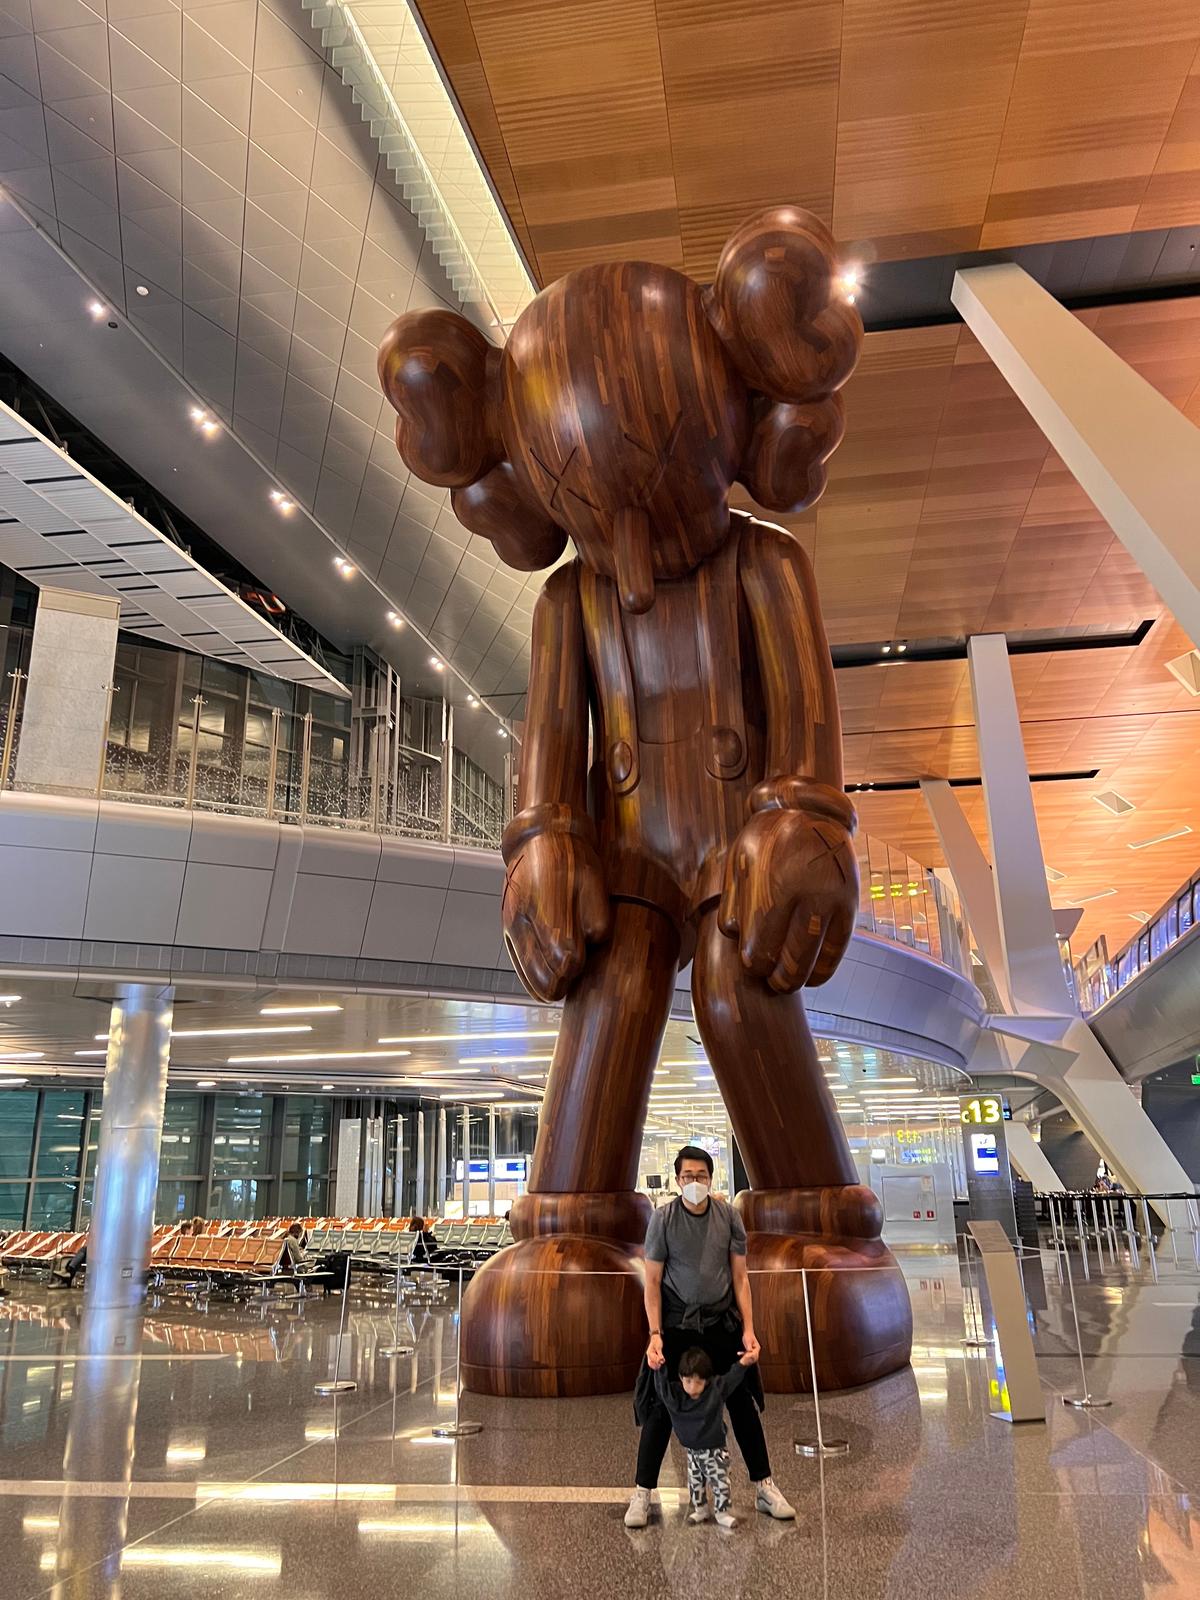 A man and boy taking a photo in front of the Small Lies sculpture by KAWS at the Hamad International Airport, Doha